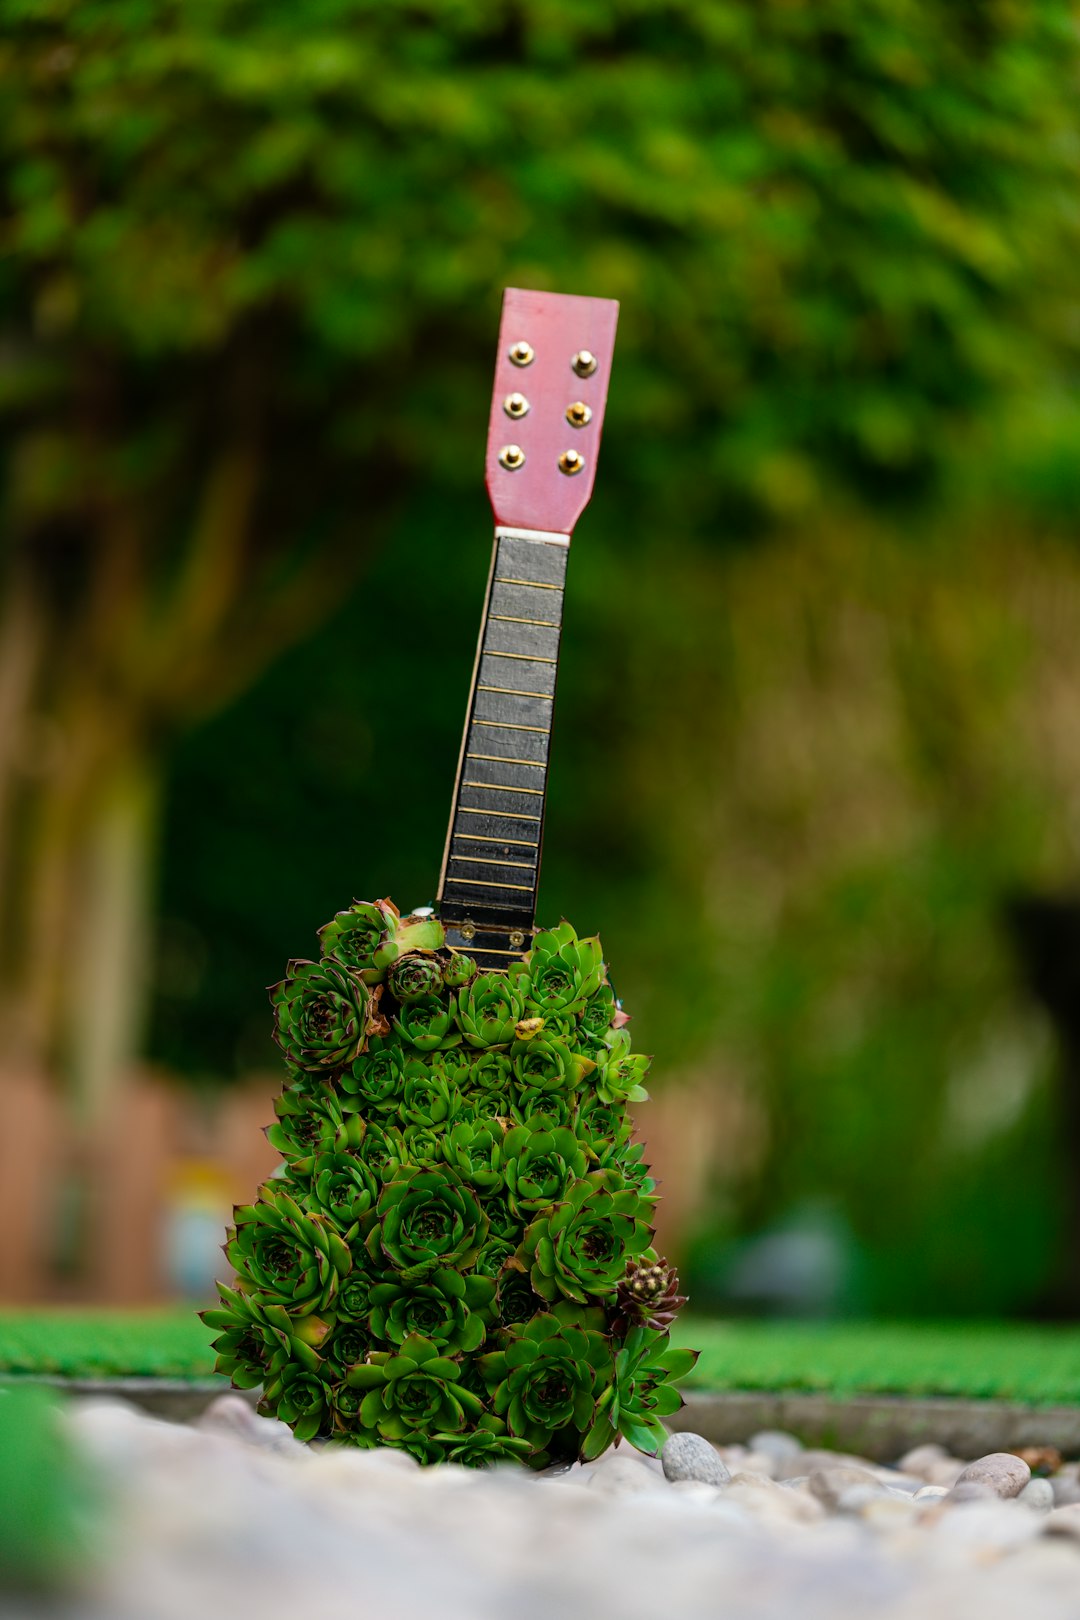 white and black guitar pick on green plant